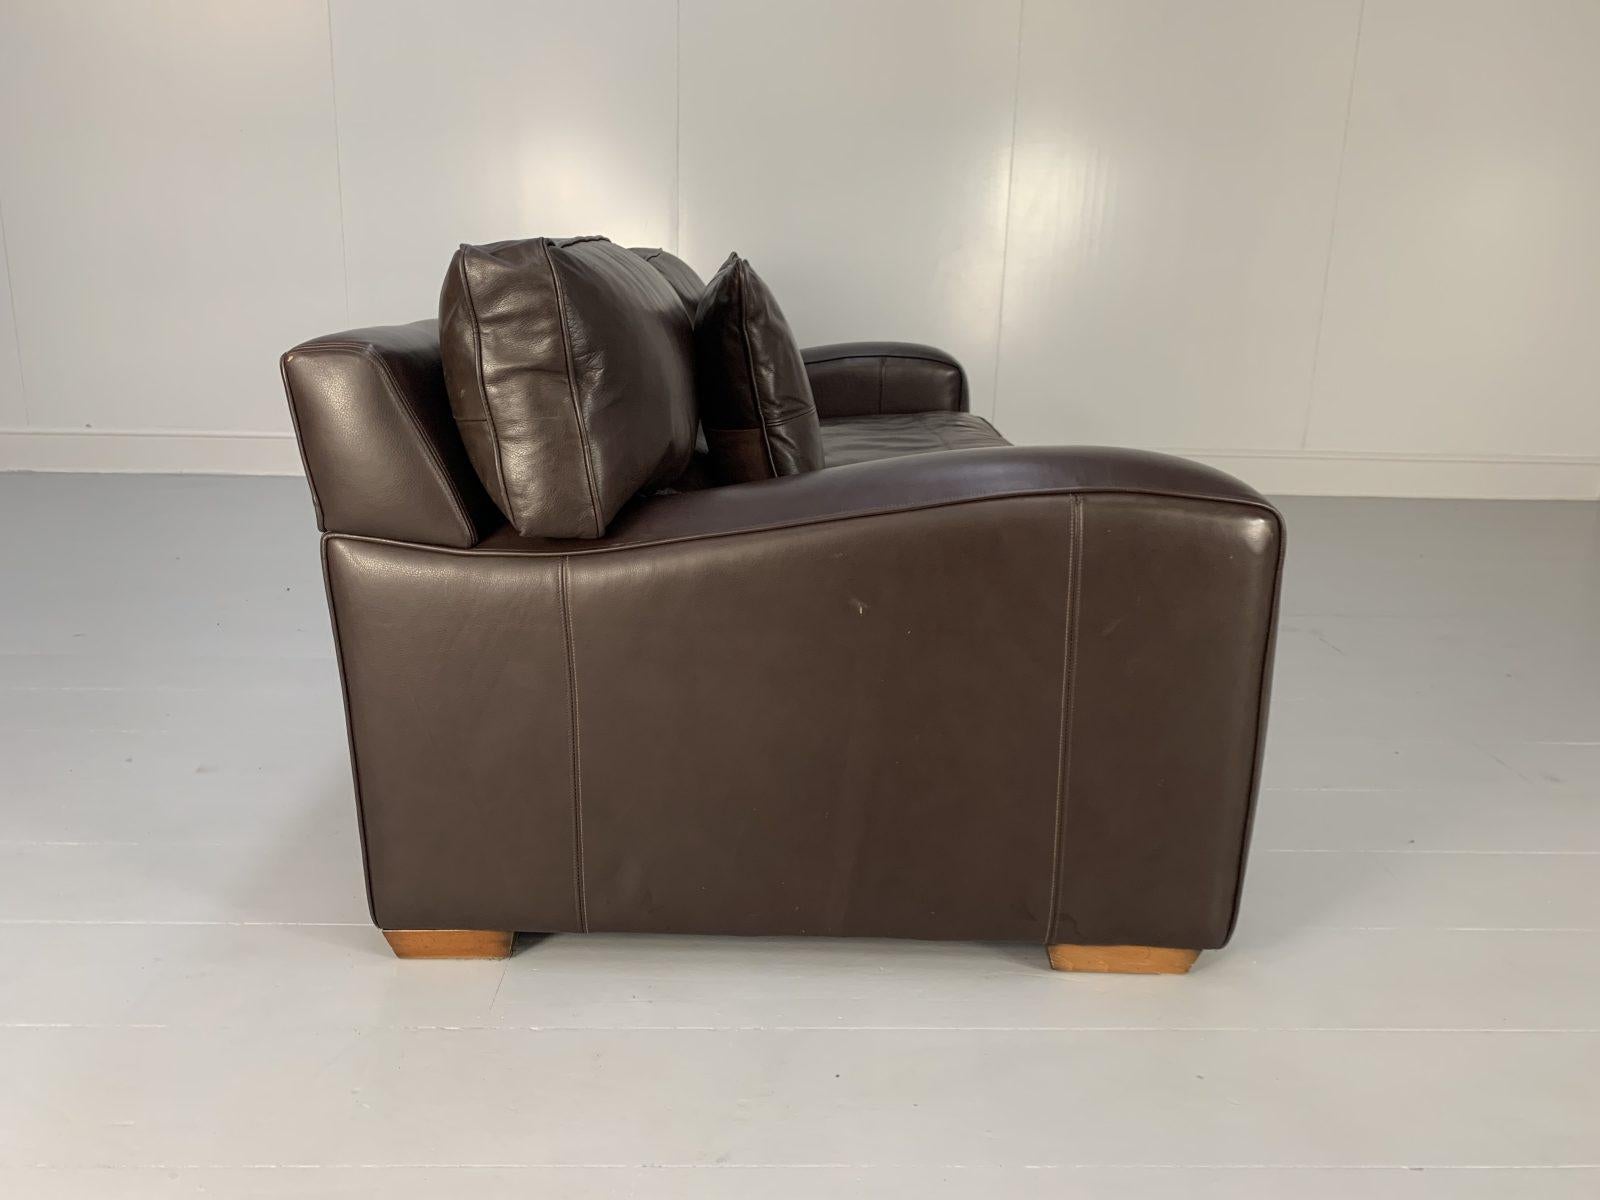 Duresta “Panther” Grand 3-Seat Sofa, in Dark Brown Leather In Good Condition For Sale In Barrowford, GB